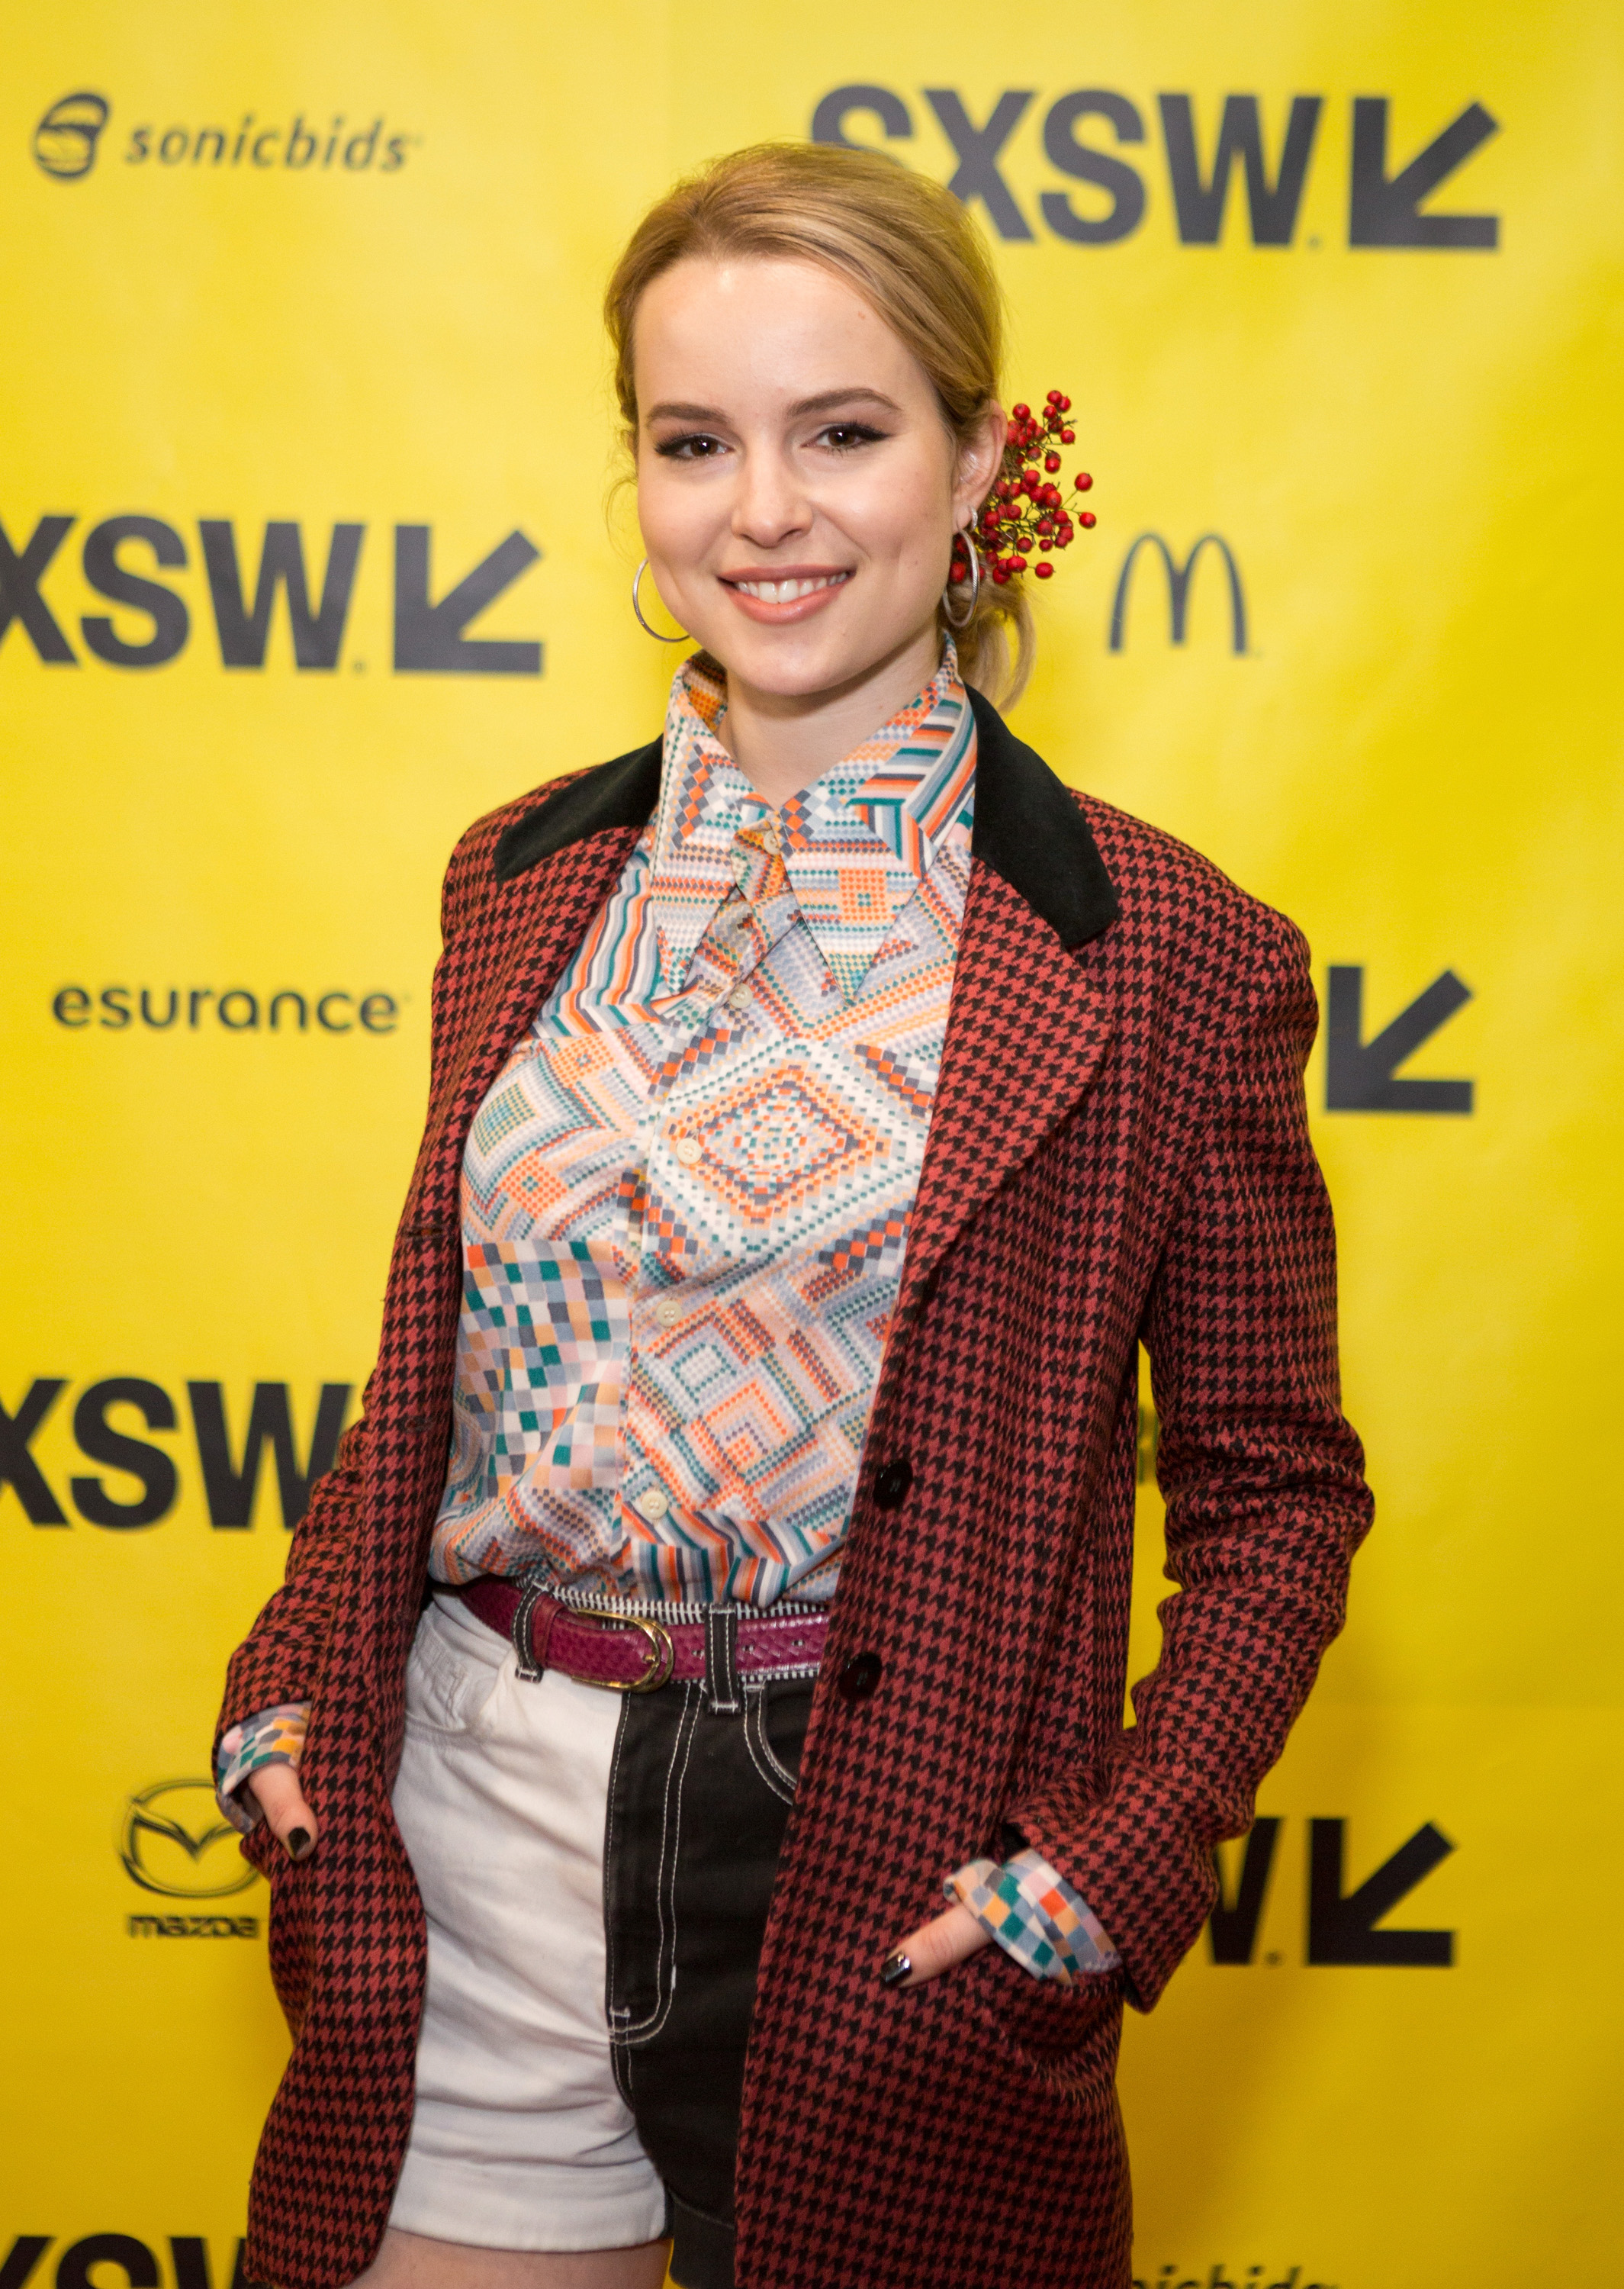 Bridgit Mendler attends Digital Revolution: A Look at Music’s New Frontier during the 2017 SXSW Conference and Festivals at Austin Convention Center on March 15, 2017, in Austin, Texas